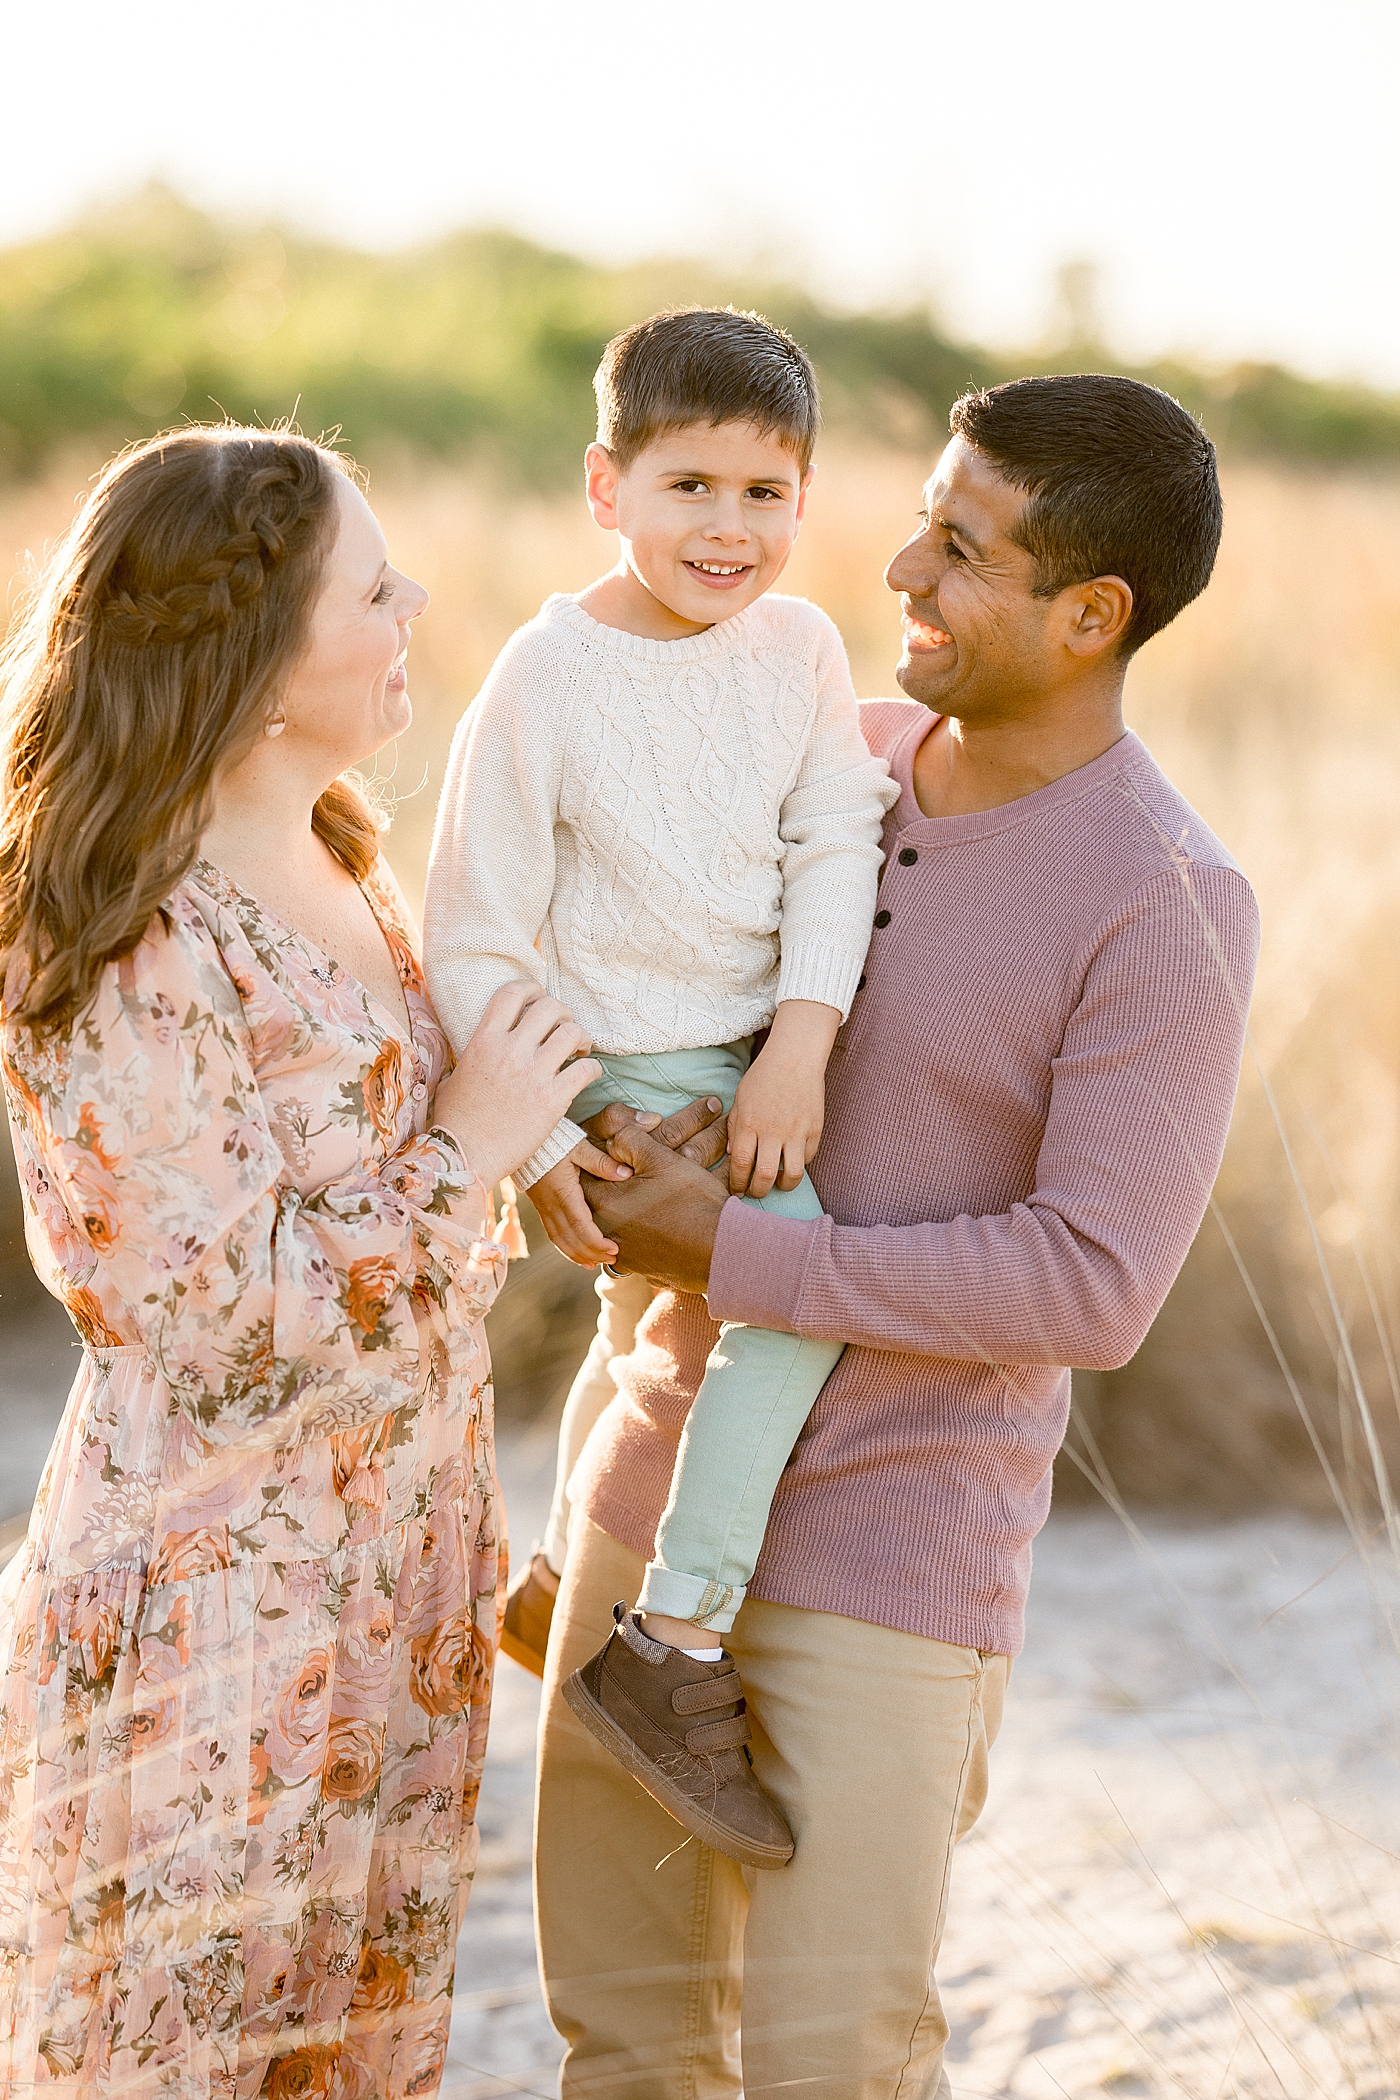 Golden hour sunset family session at Cypress Point Park. Photos by Brittany Elise Photography.